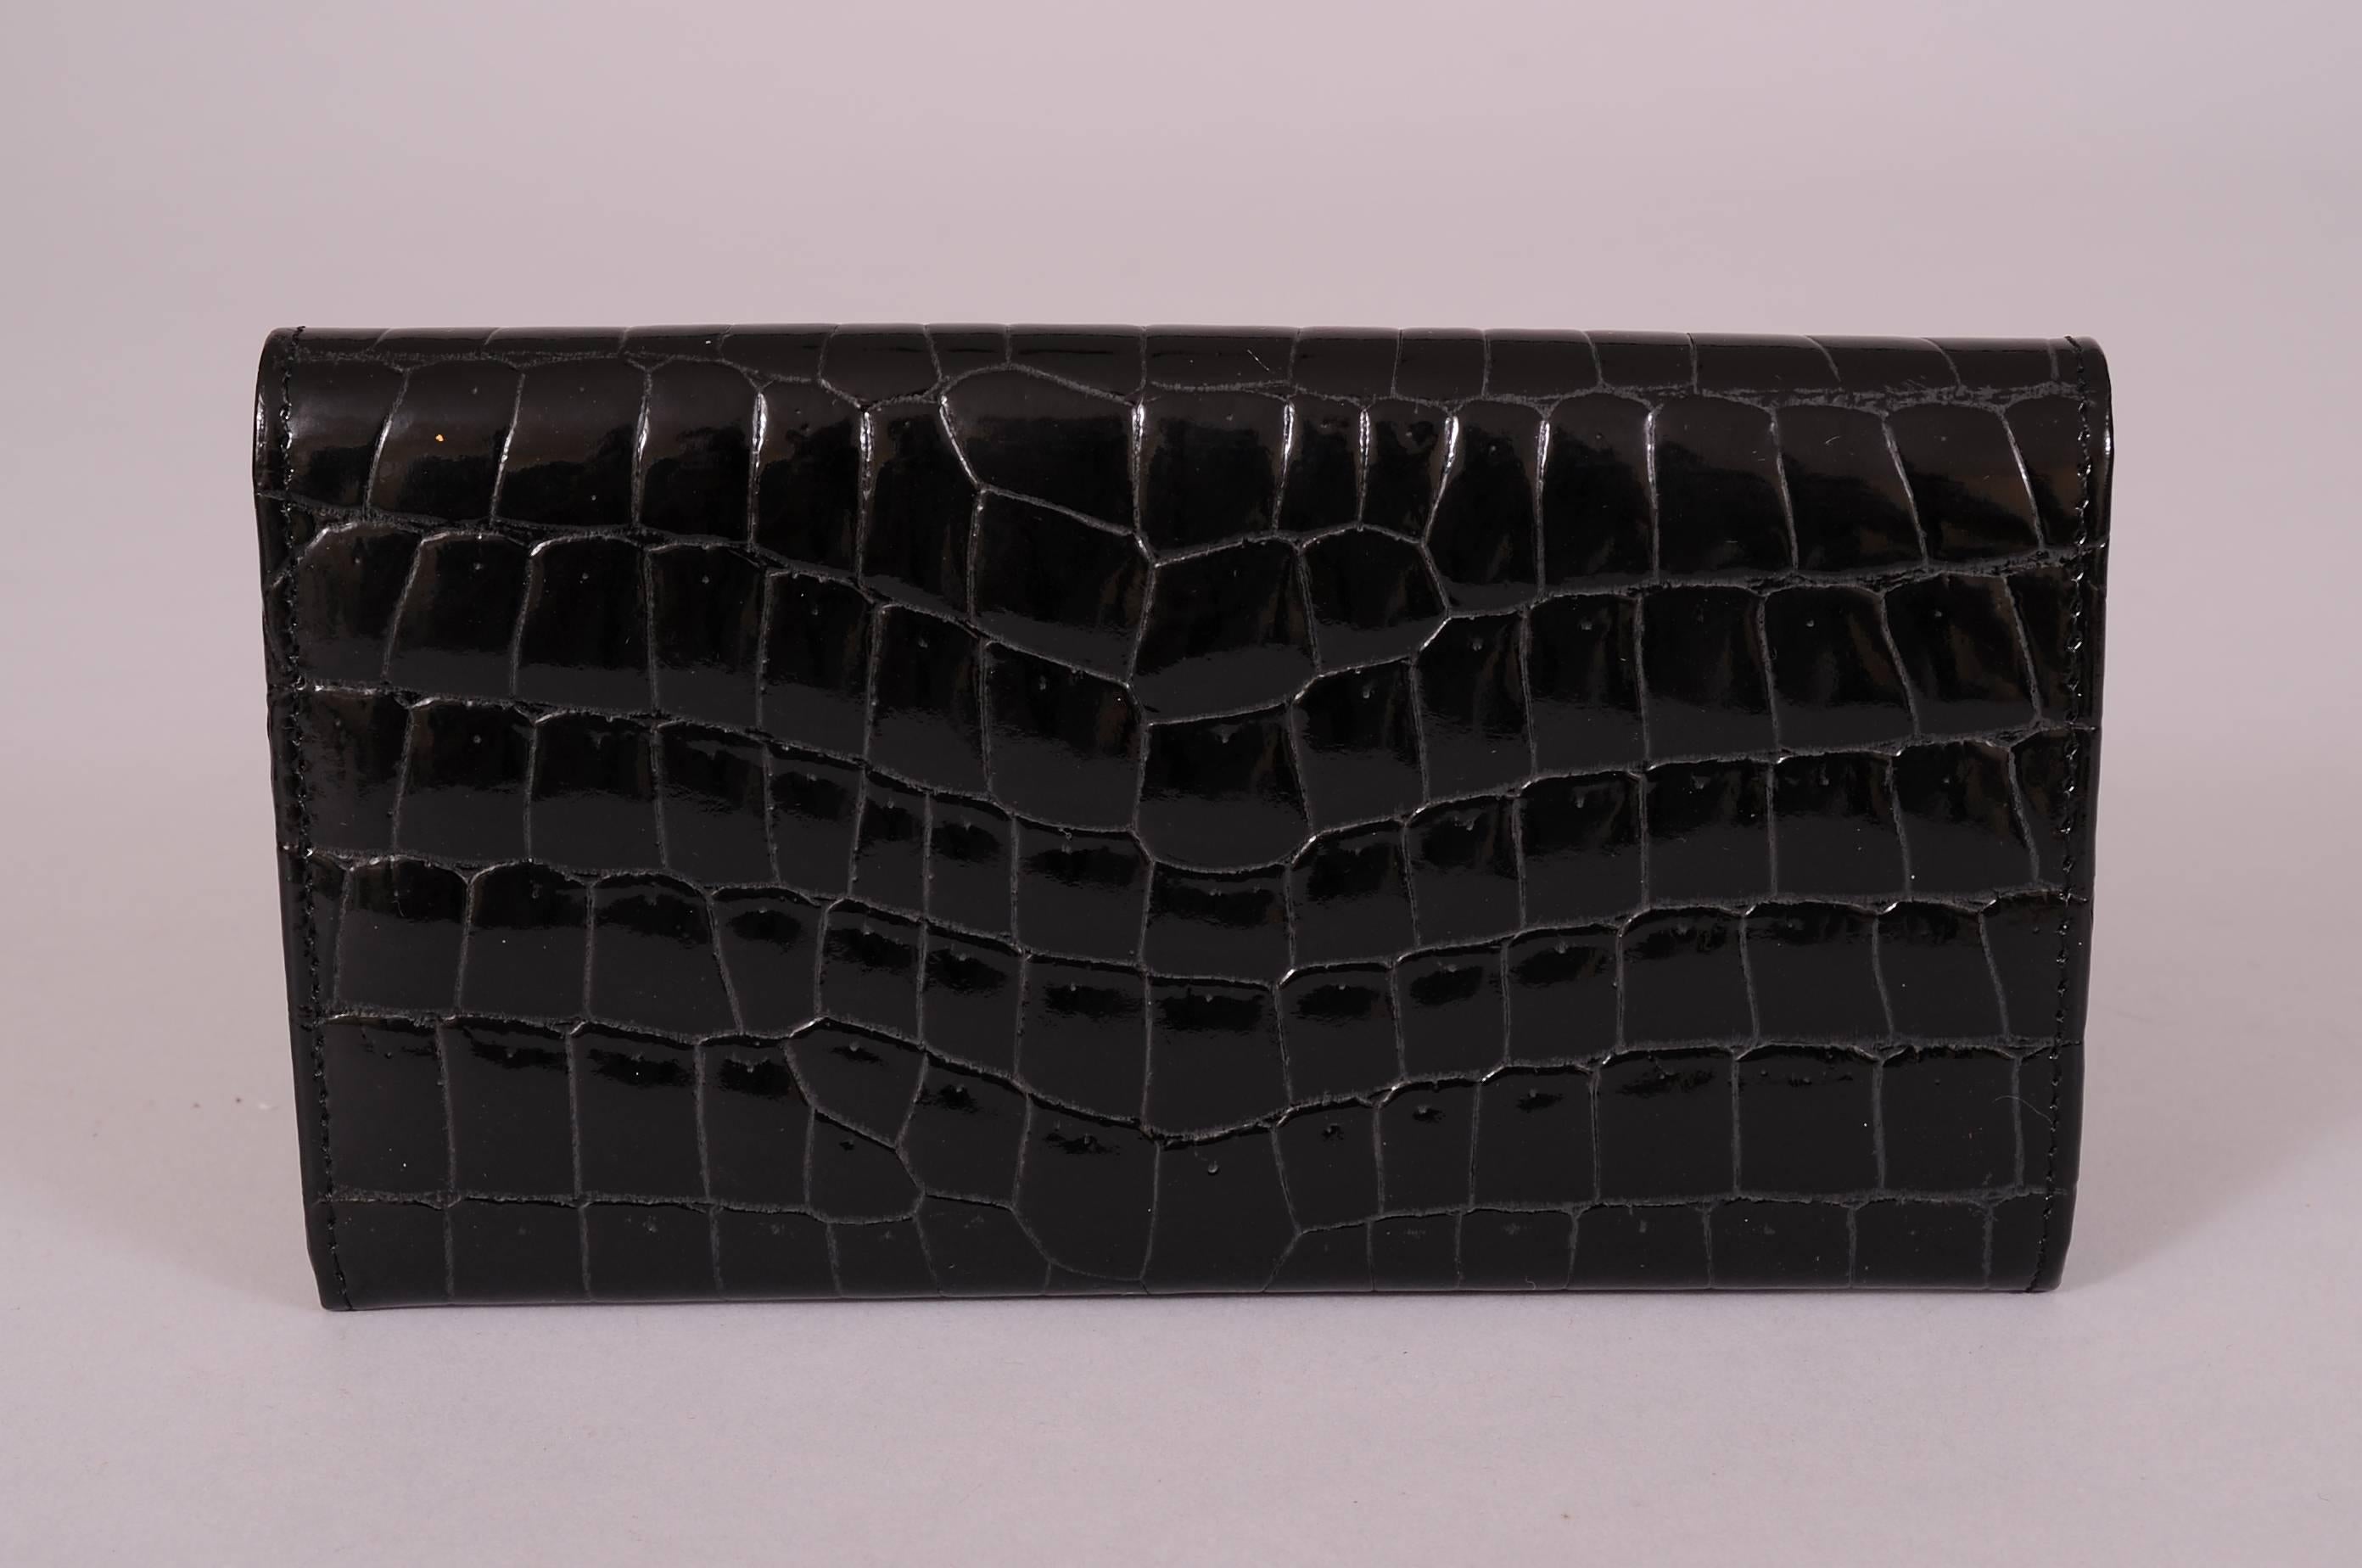 This 100+ year old French leather goods house has created a chic and functional black crocodile wallet with a snap closure. There are two large open pockets, one zippered section and three slip pockets inside. It has never been used and is in